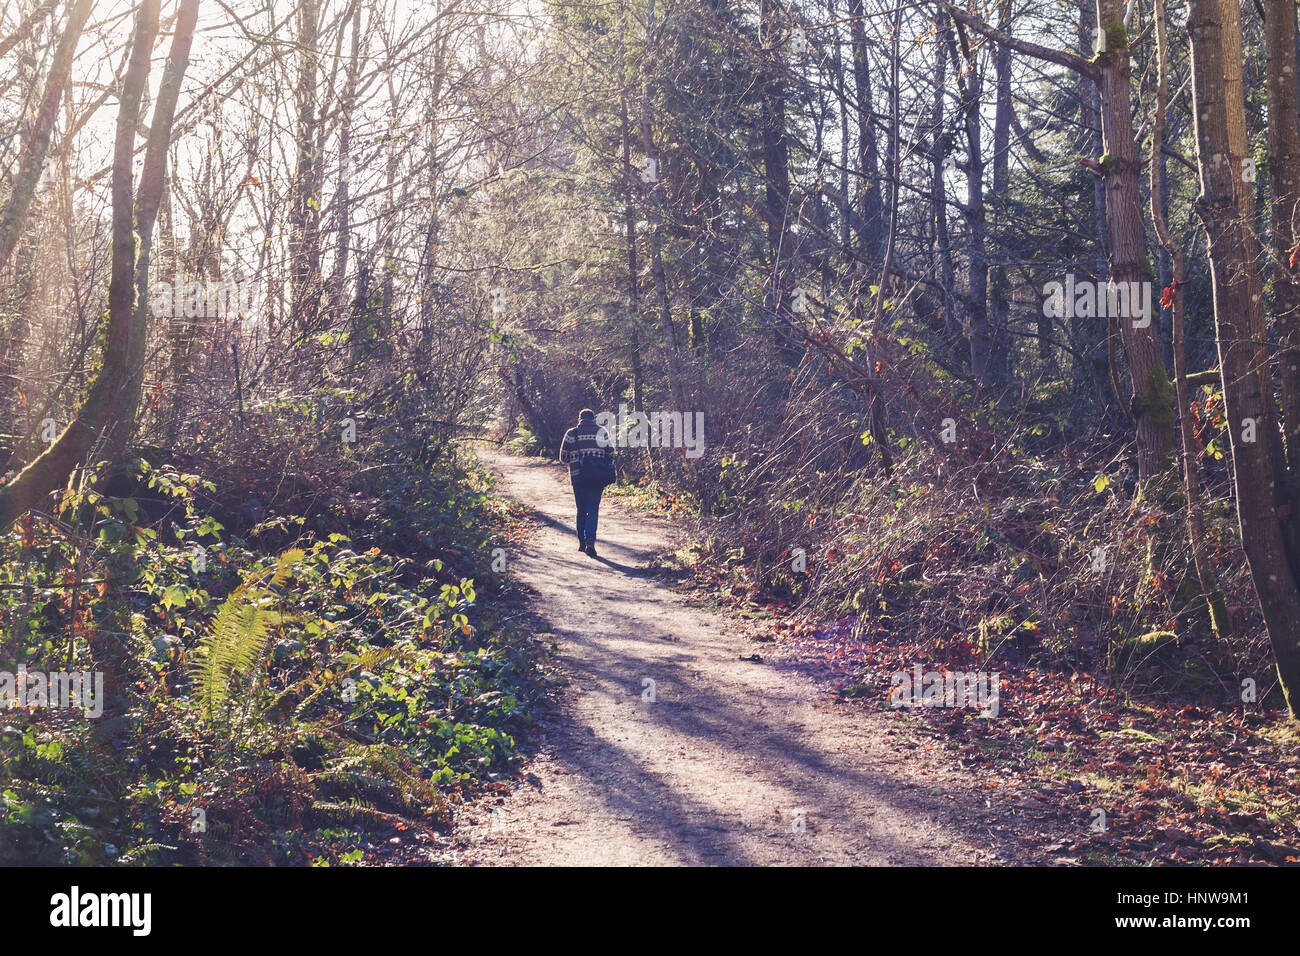 Person walking on path in forest. Victoria, BC, Canada Stock Photo